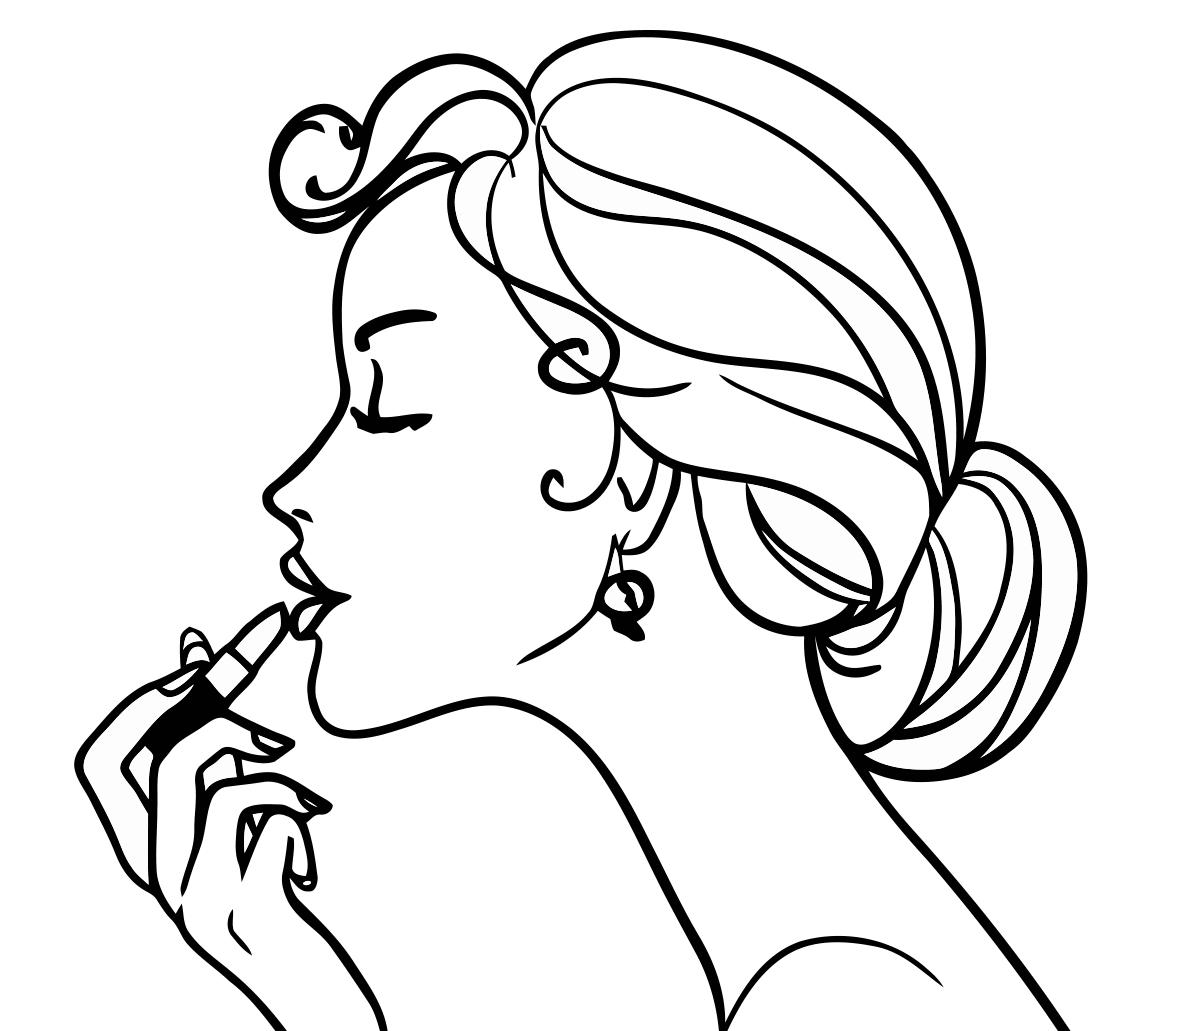 Woman coloring pages to download and print for free